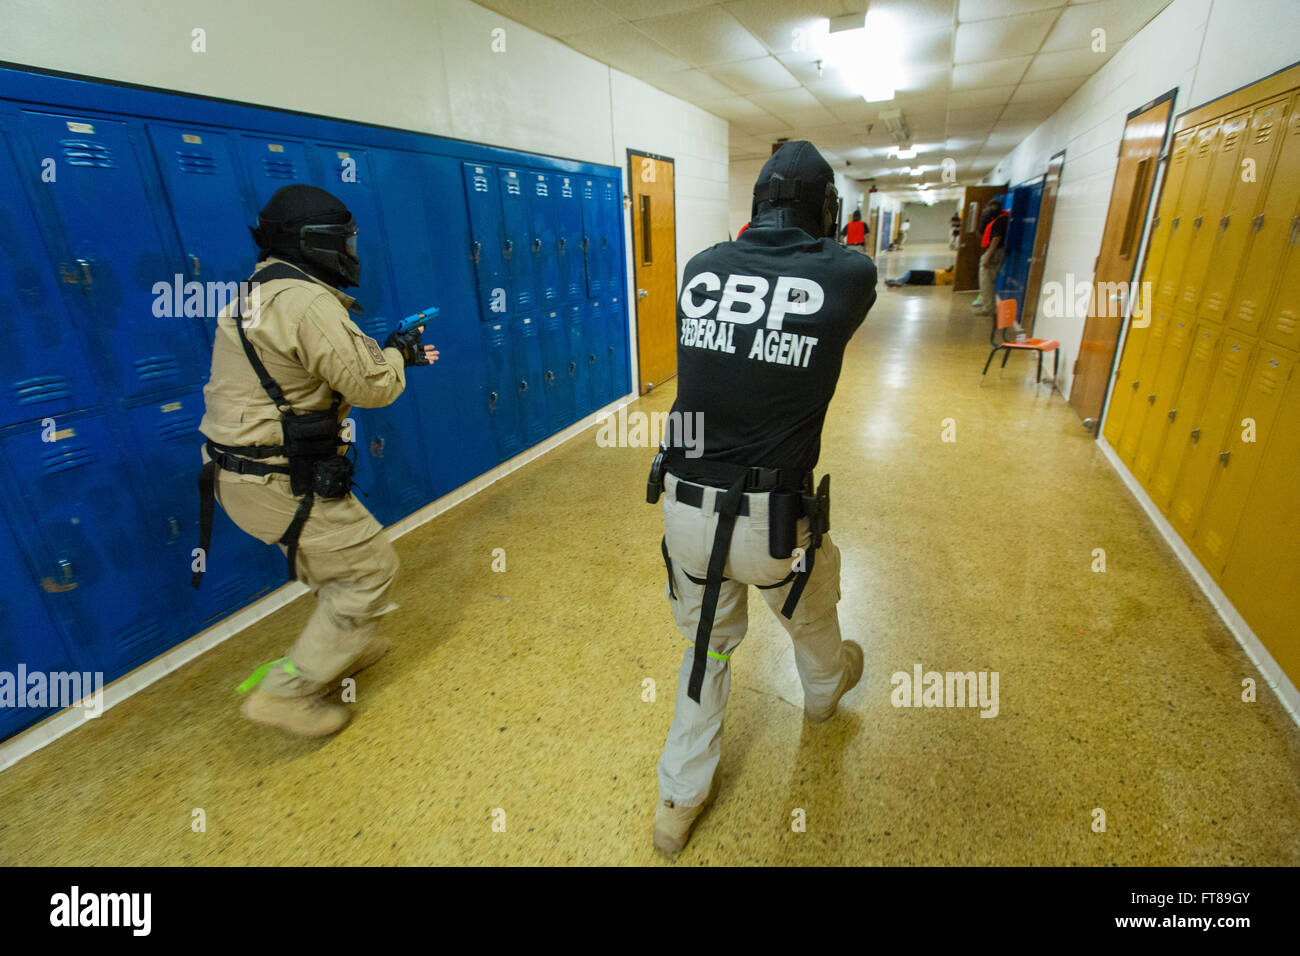 CBP Office of Air and Marine Pilots participate in an Active Shooter Scenario at an NATC facility to learn how to safely interact with other law enforcement communities in a dynamic enviroment to protect citizens and neutralize threats in a school based situation. Students and instructors move thru an abandoned school training for the Active Shooter Scenario making sure to wear important safety equipment. Photo by James Tourtellotte Stock Photo